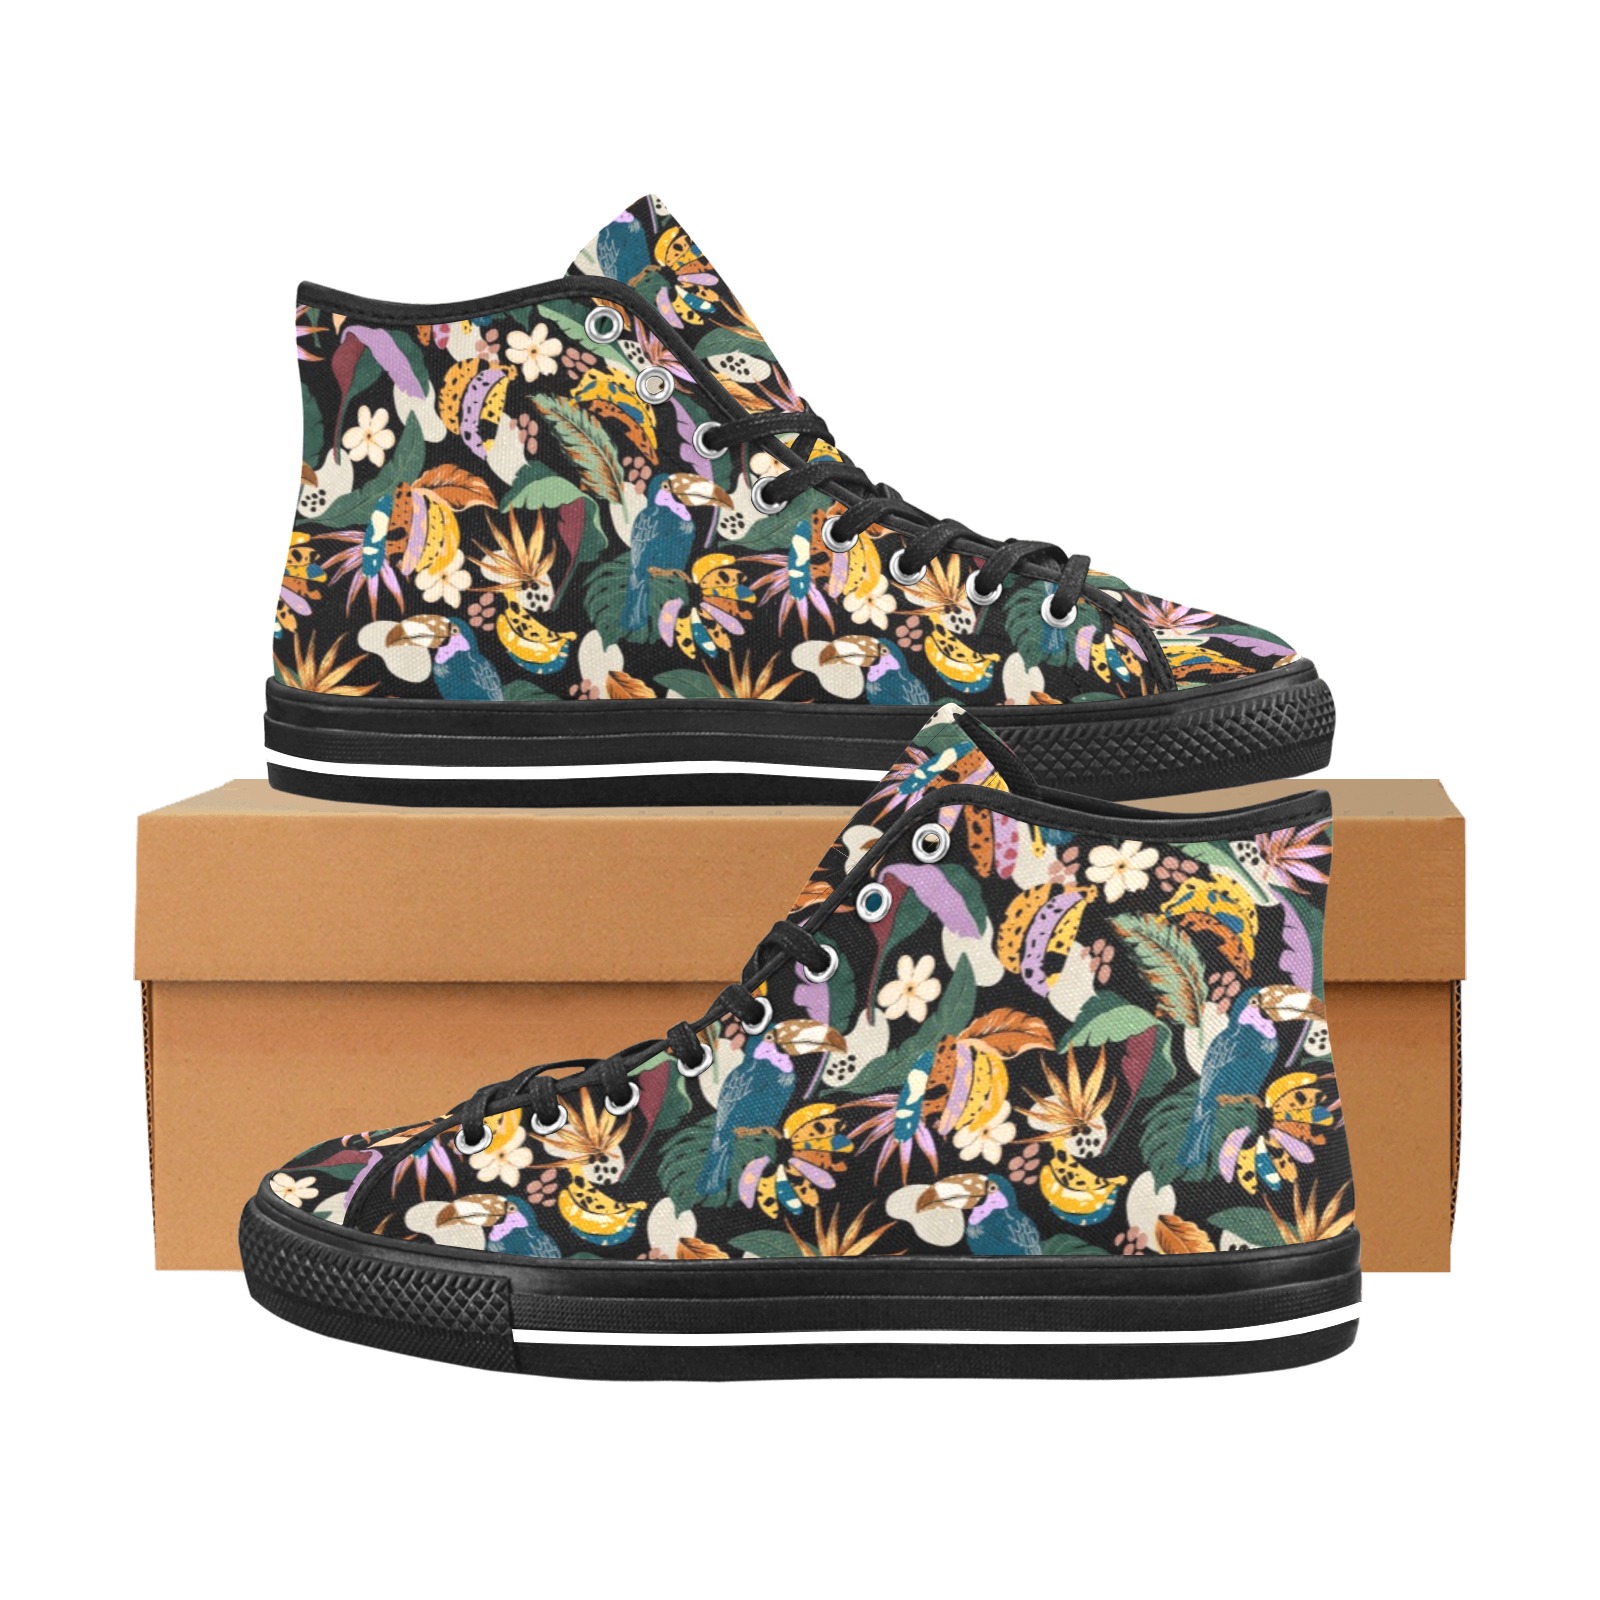 Toucans in the modern colorful dark jungle 2 Vancouver H Women's Canvas Shoes (1013-1)